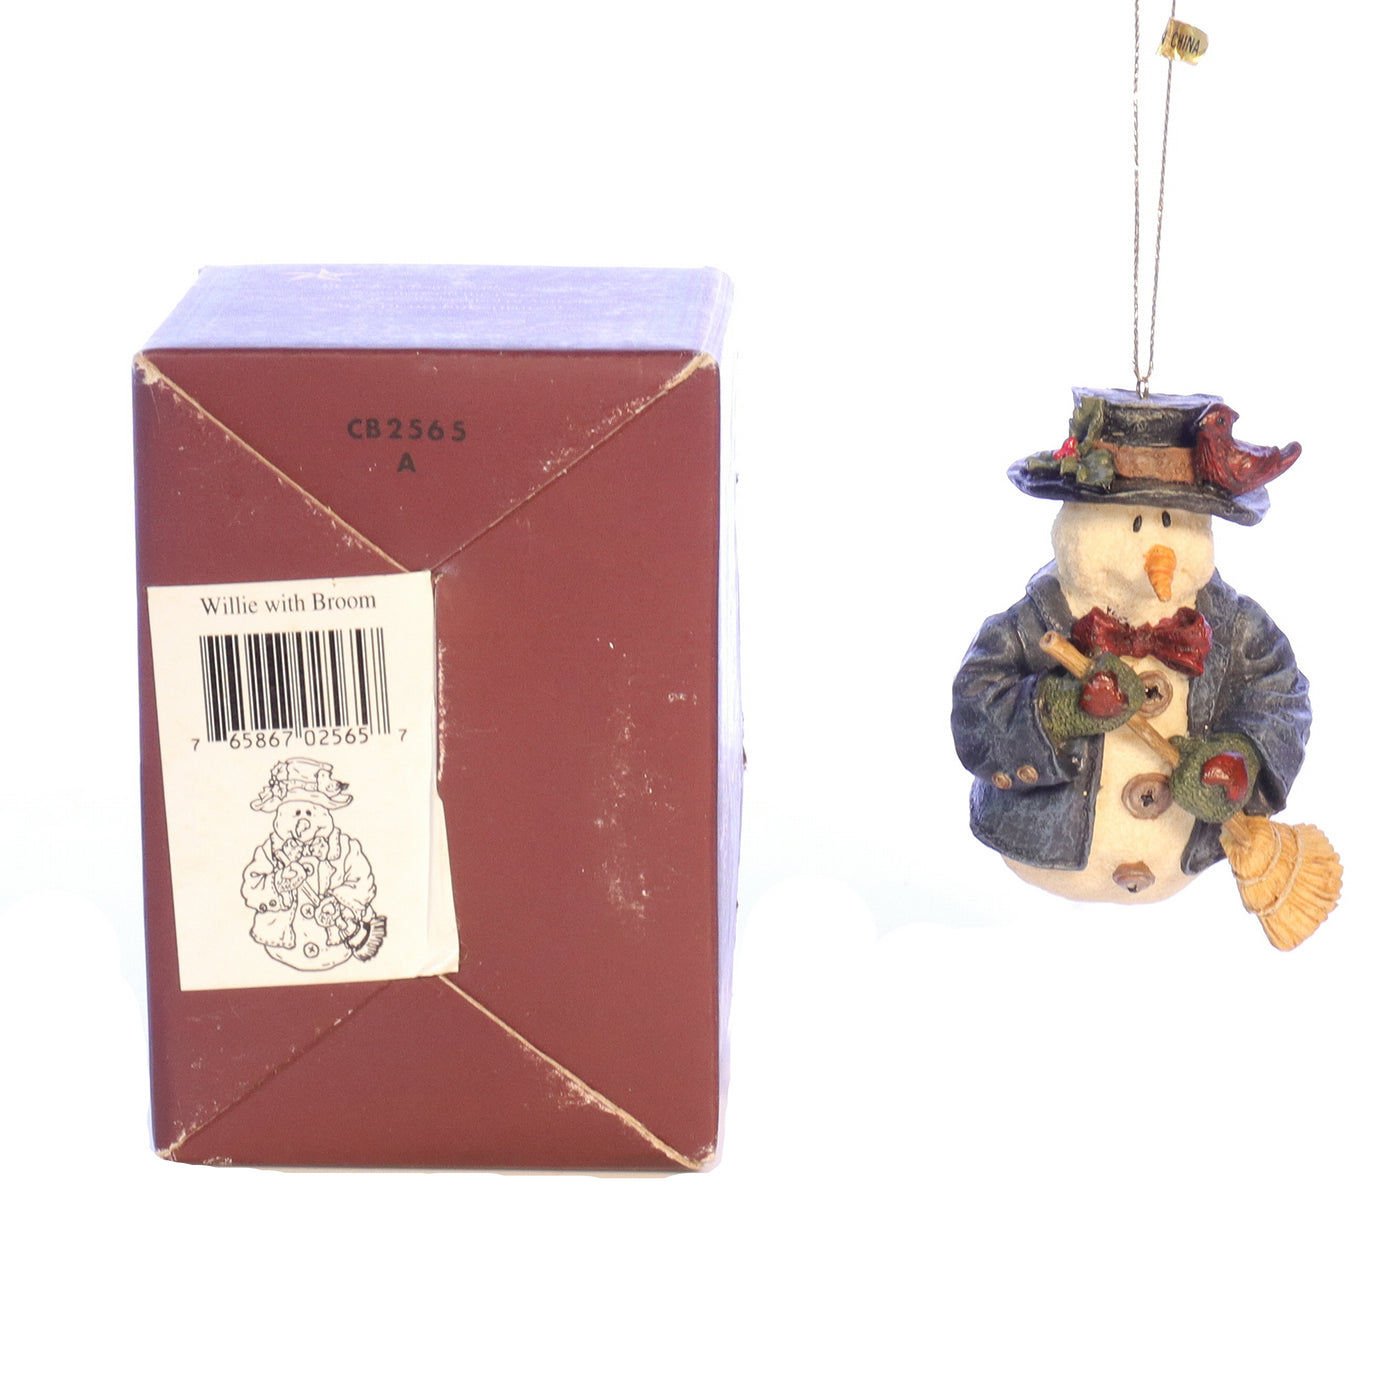 Boyds Bears Resin Ornament in Box Christmas 2565 Willie with Broom 1996 3"